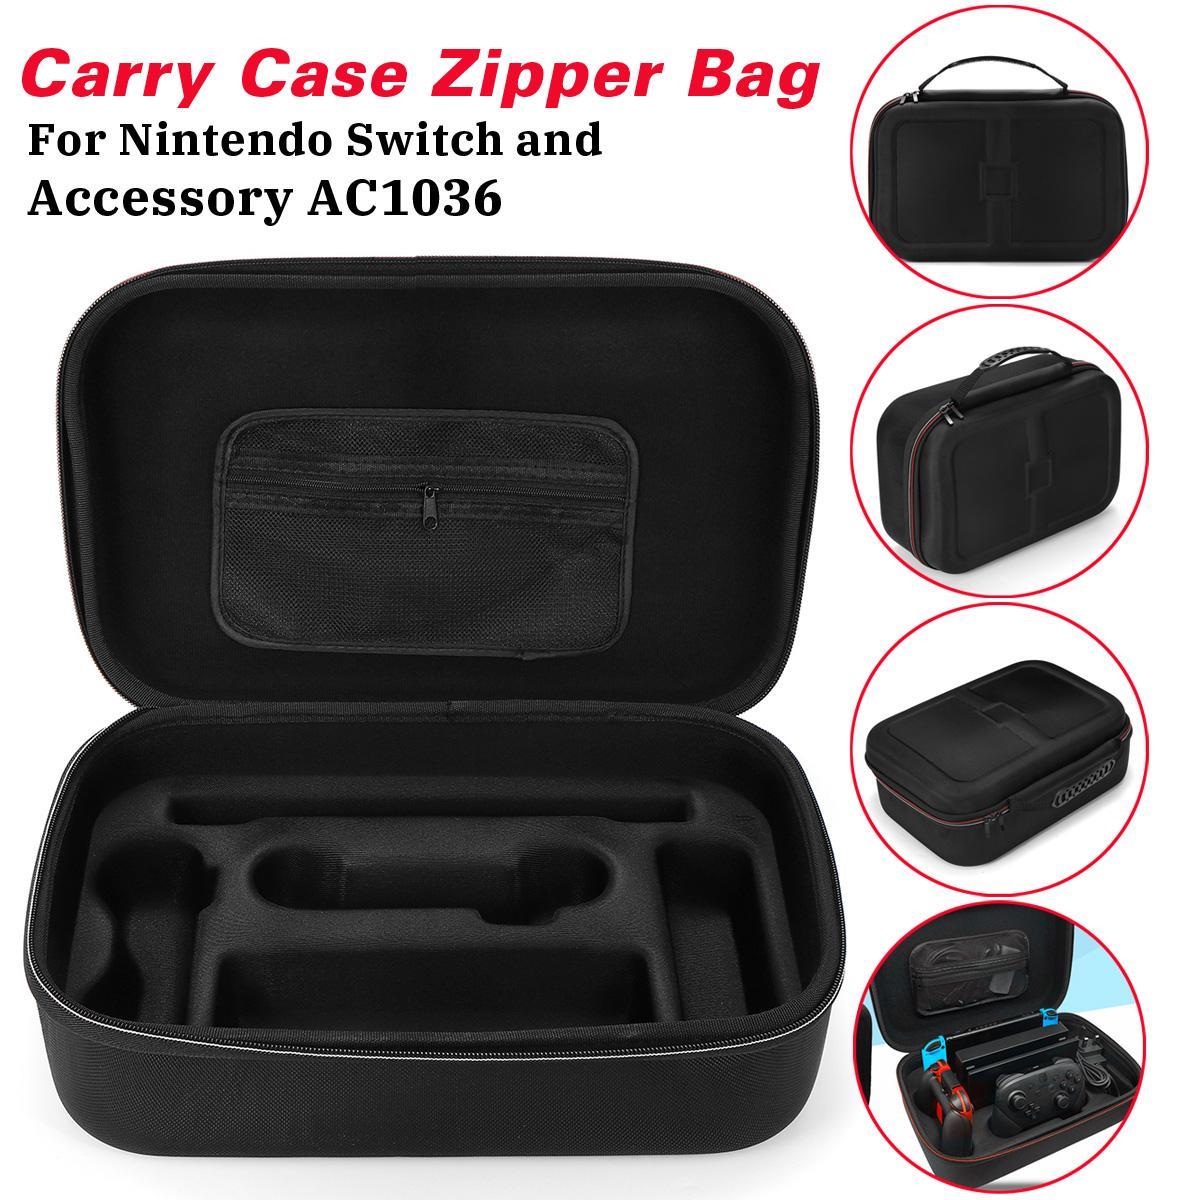 EVA Shockproof Hard Protective Carry Case Waterproof Zipper Bag For Nintendo Switch Game Console